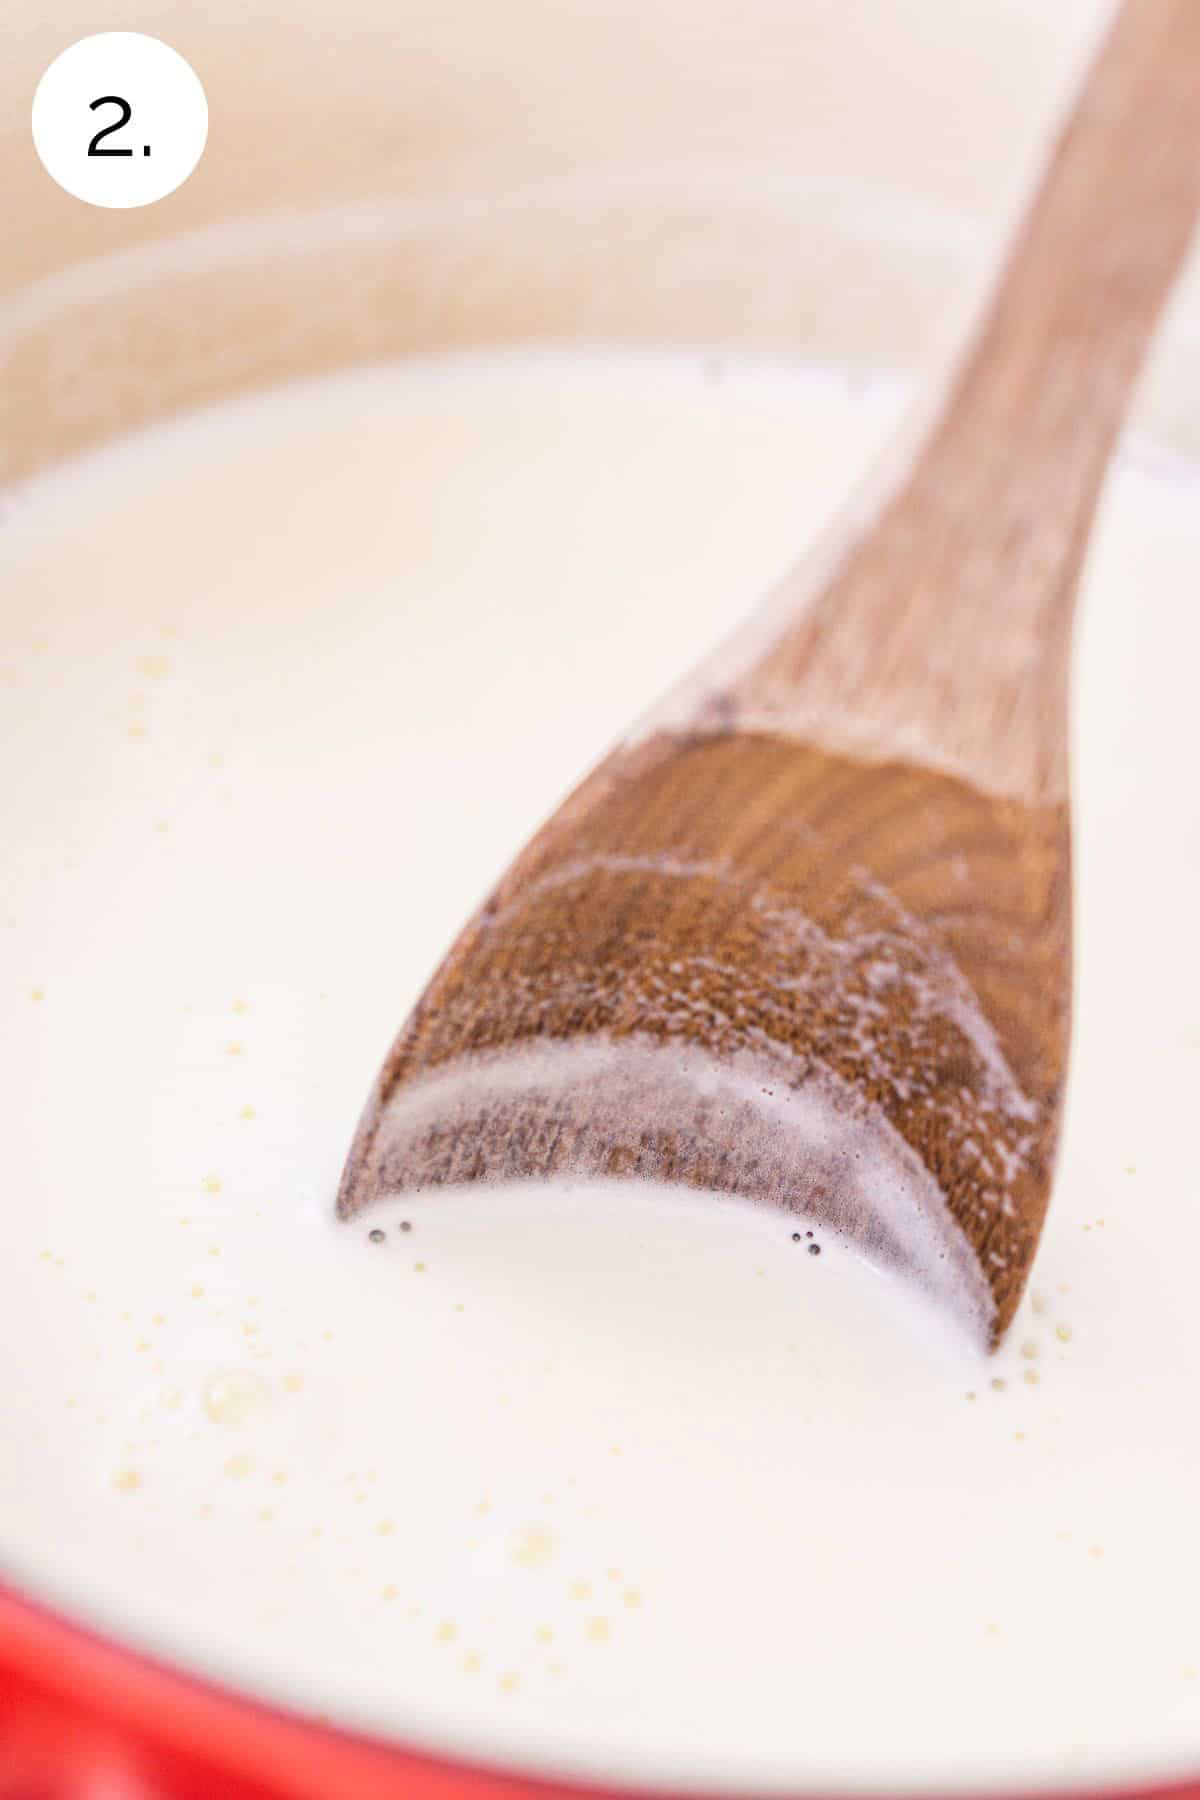 A wooden spoon stirring the milk and cream mixture in a red saucepan on the stove-top range.